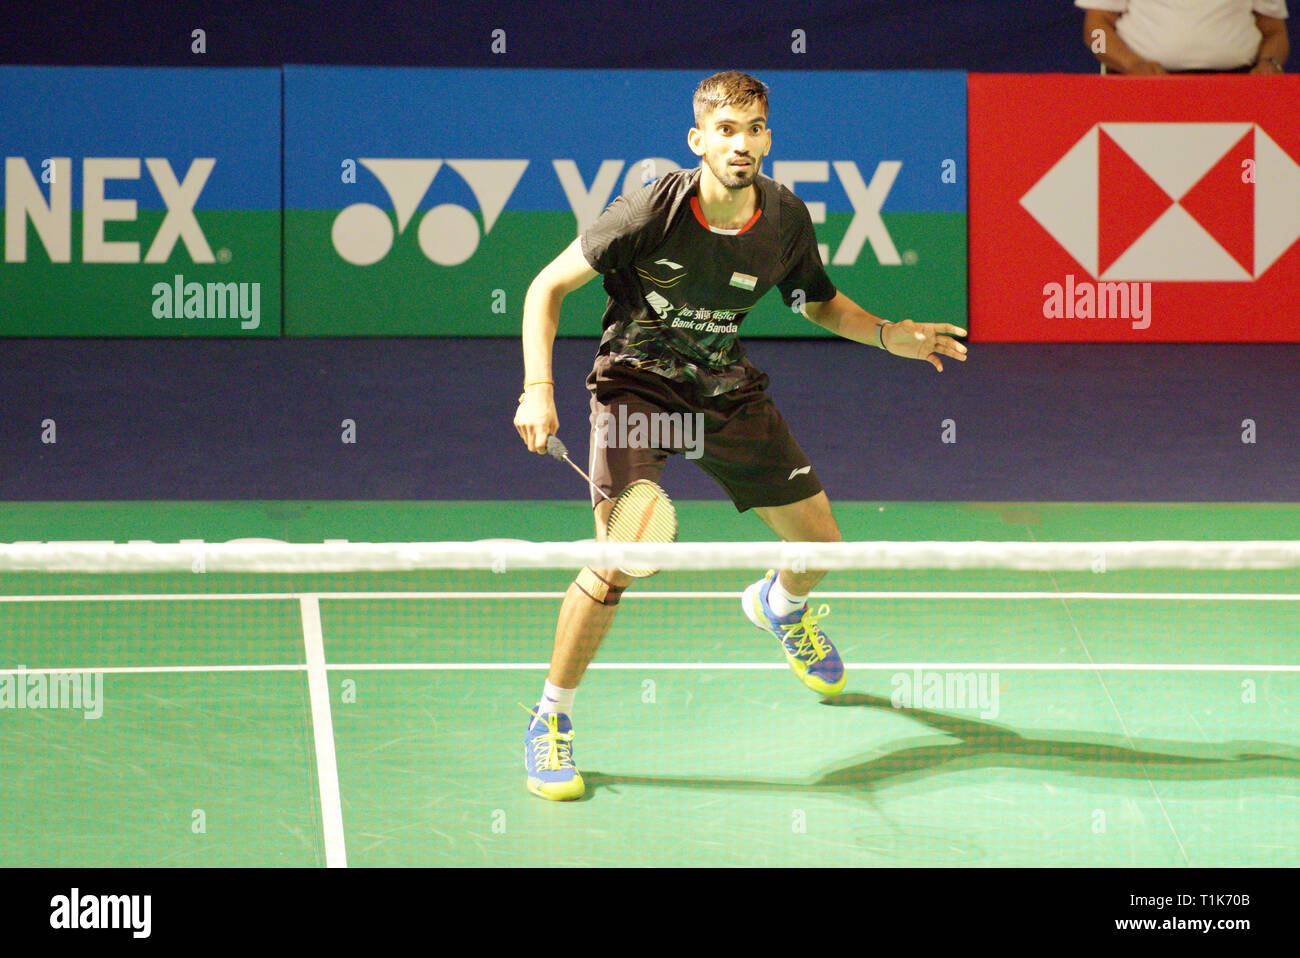 New Delhi, India. 27th March 2019. Kidambi Srikanth of India in action in the first round of the Yonex Sunrise India Open 2019 in New Delhi, India. Credit: Karunesh Johri/Alamy Live News Stock Photo